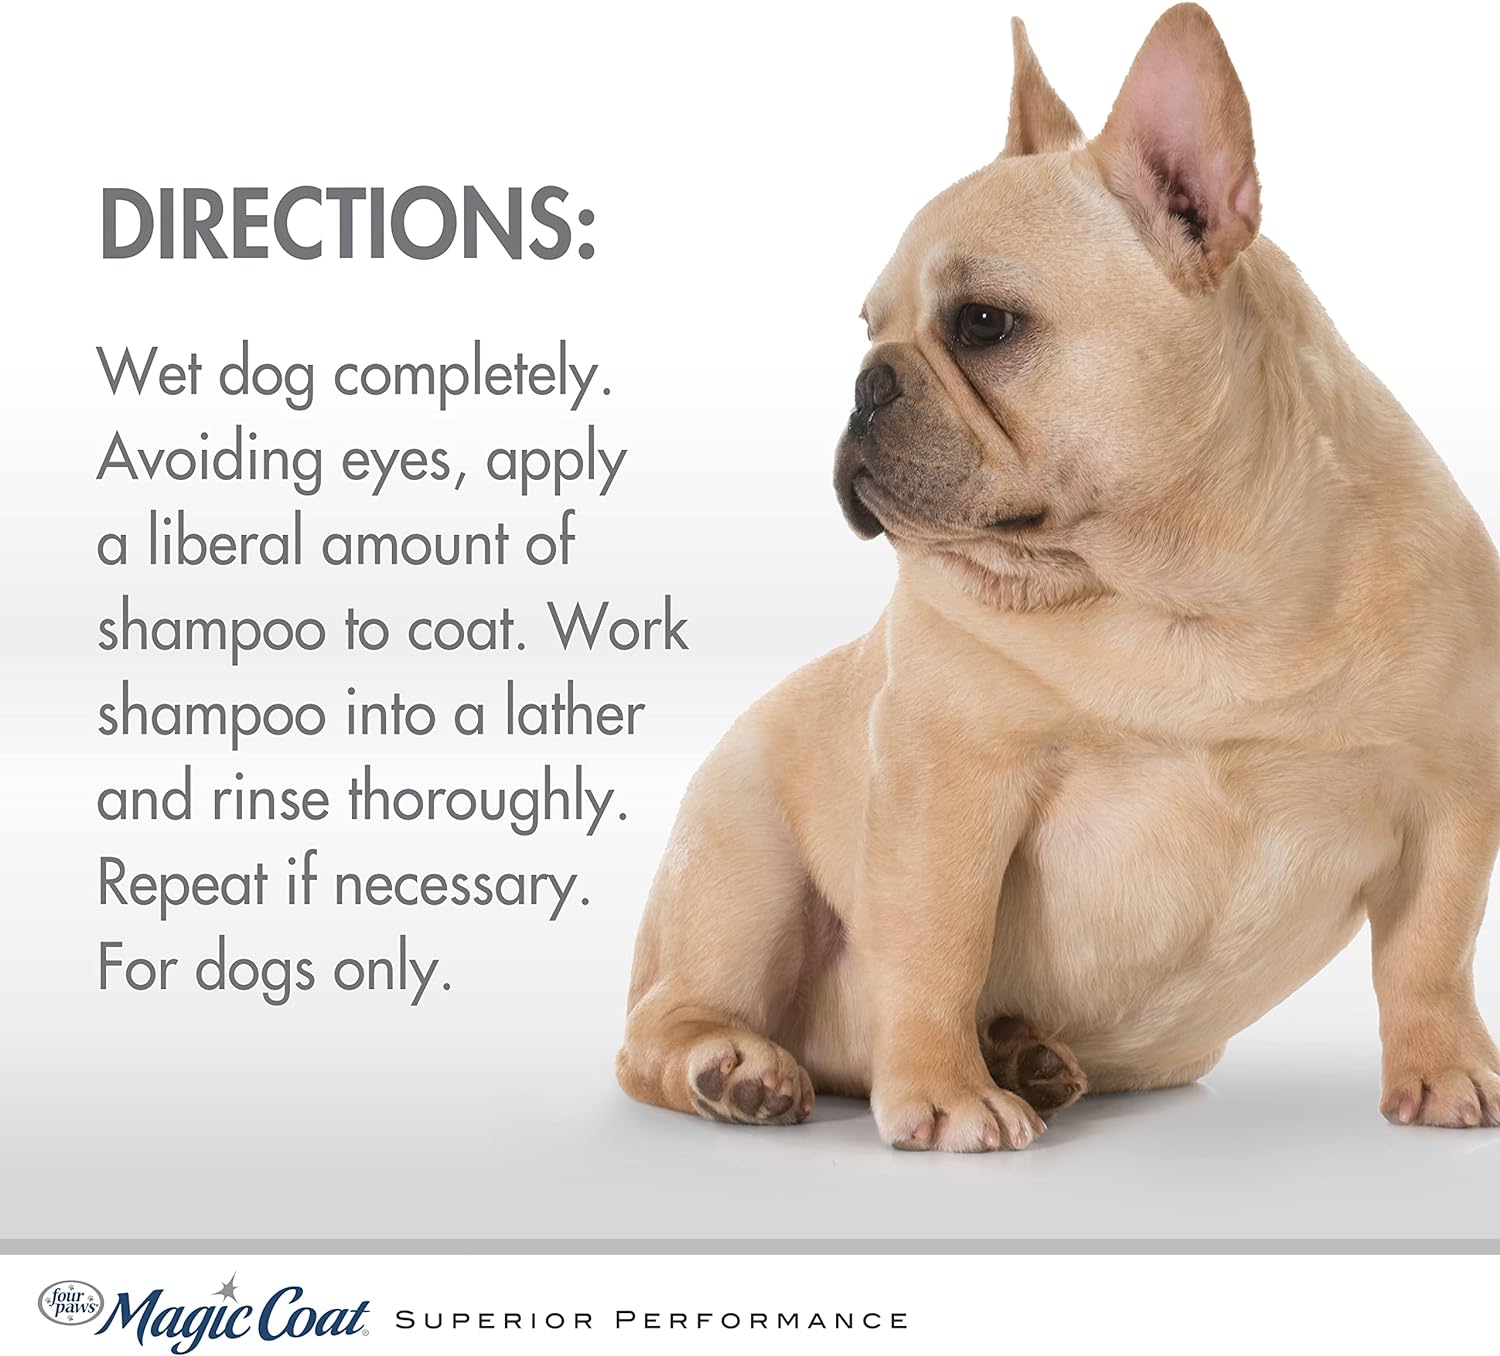 Four Paws Magic Coat Dog Shampoos for Dogs, Dog Grooming Supplies, Dog Bathing Supplies, Made in USA